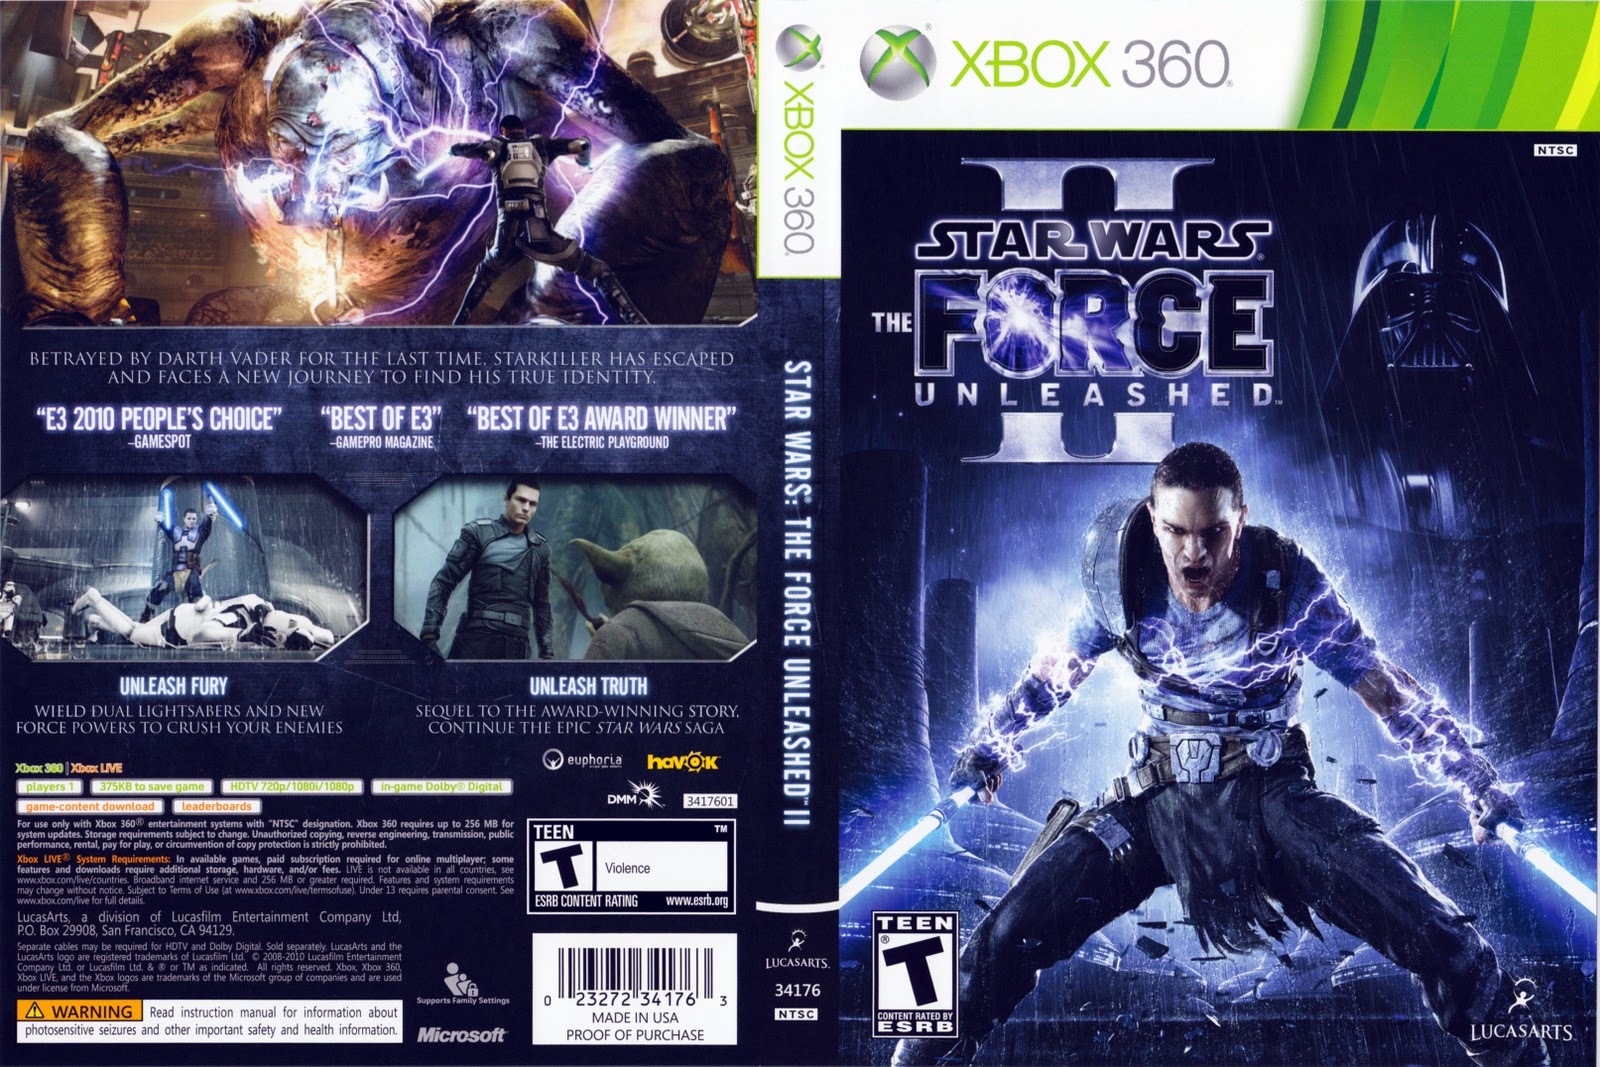 capasprimo: star wars force 2 unleashed xbox